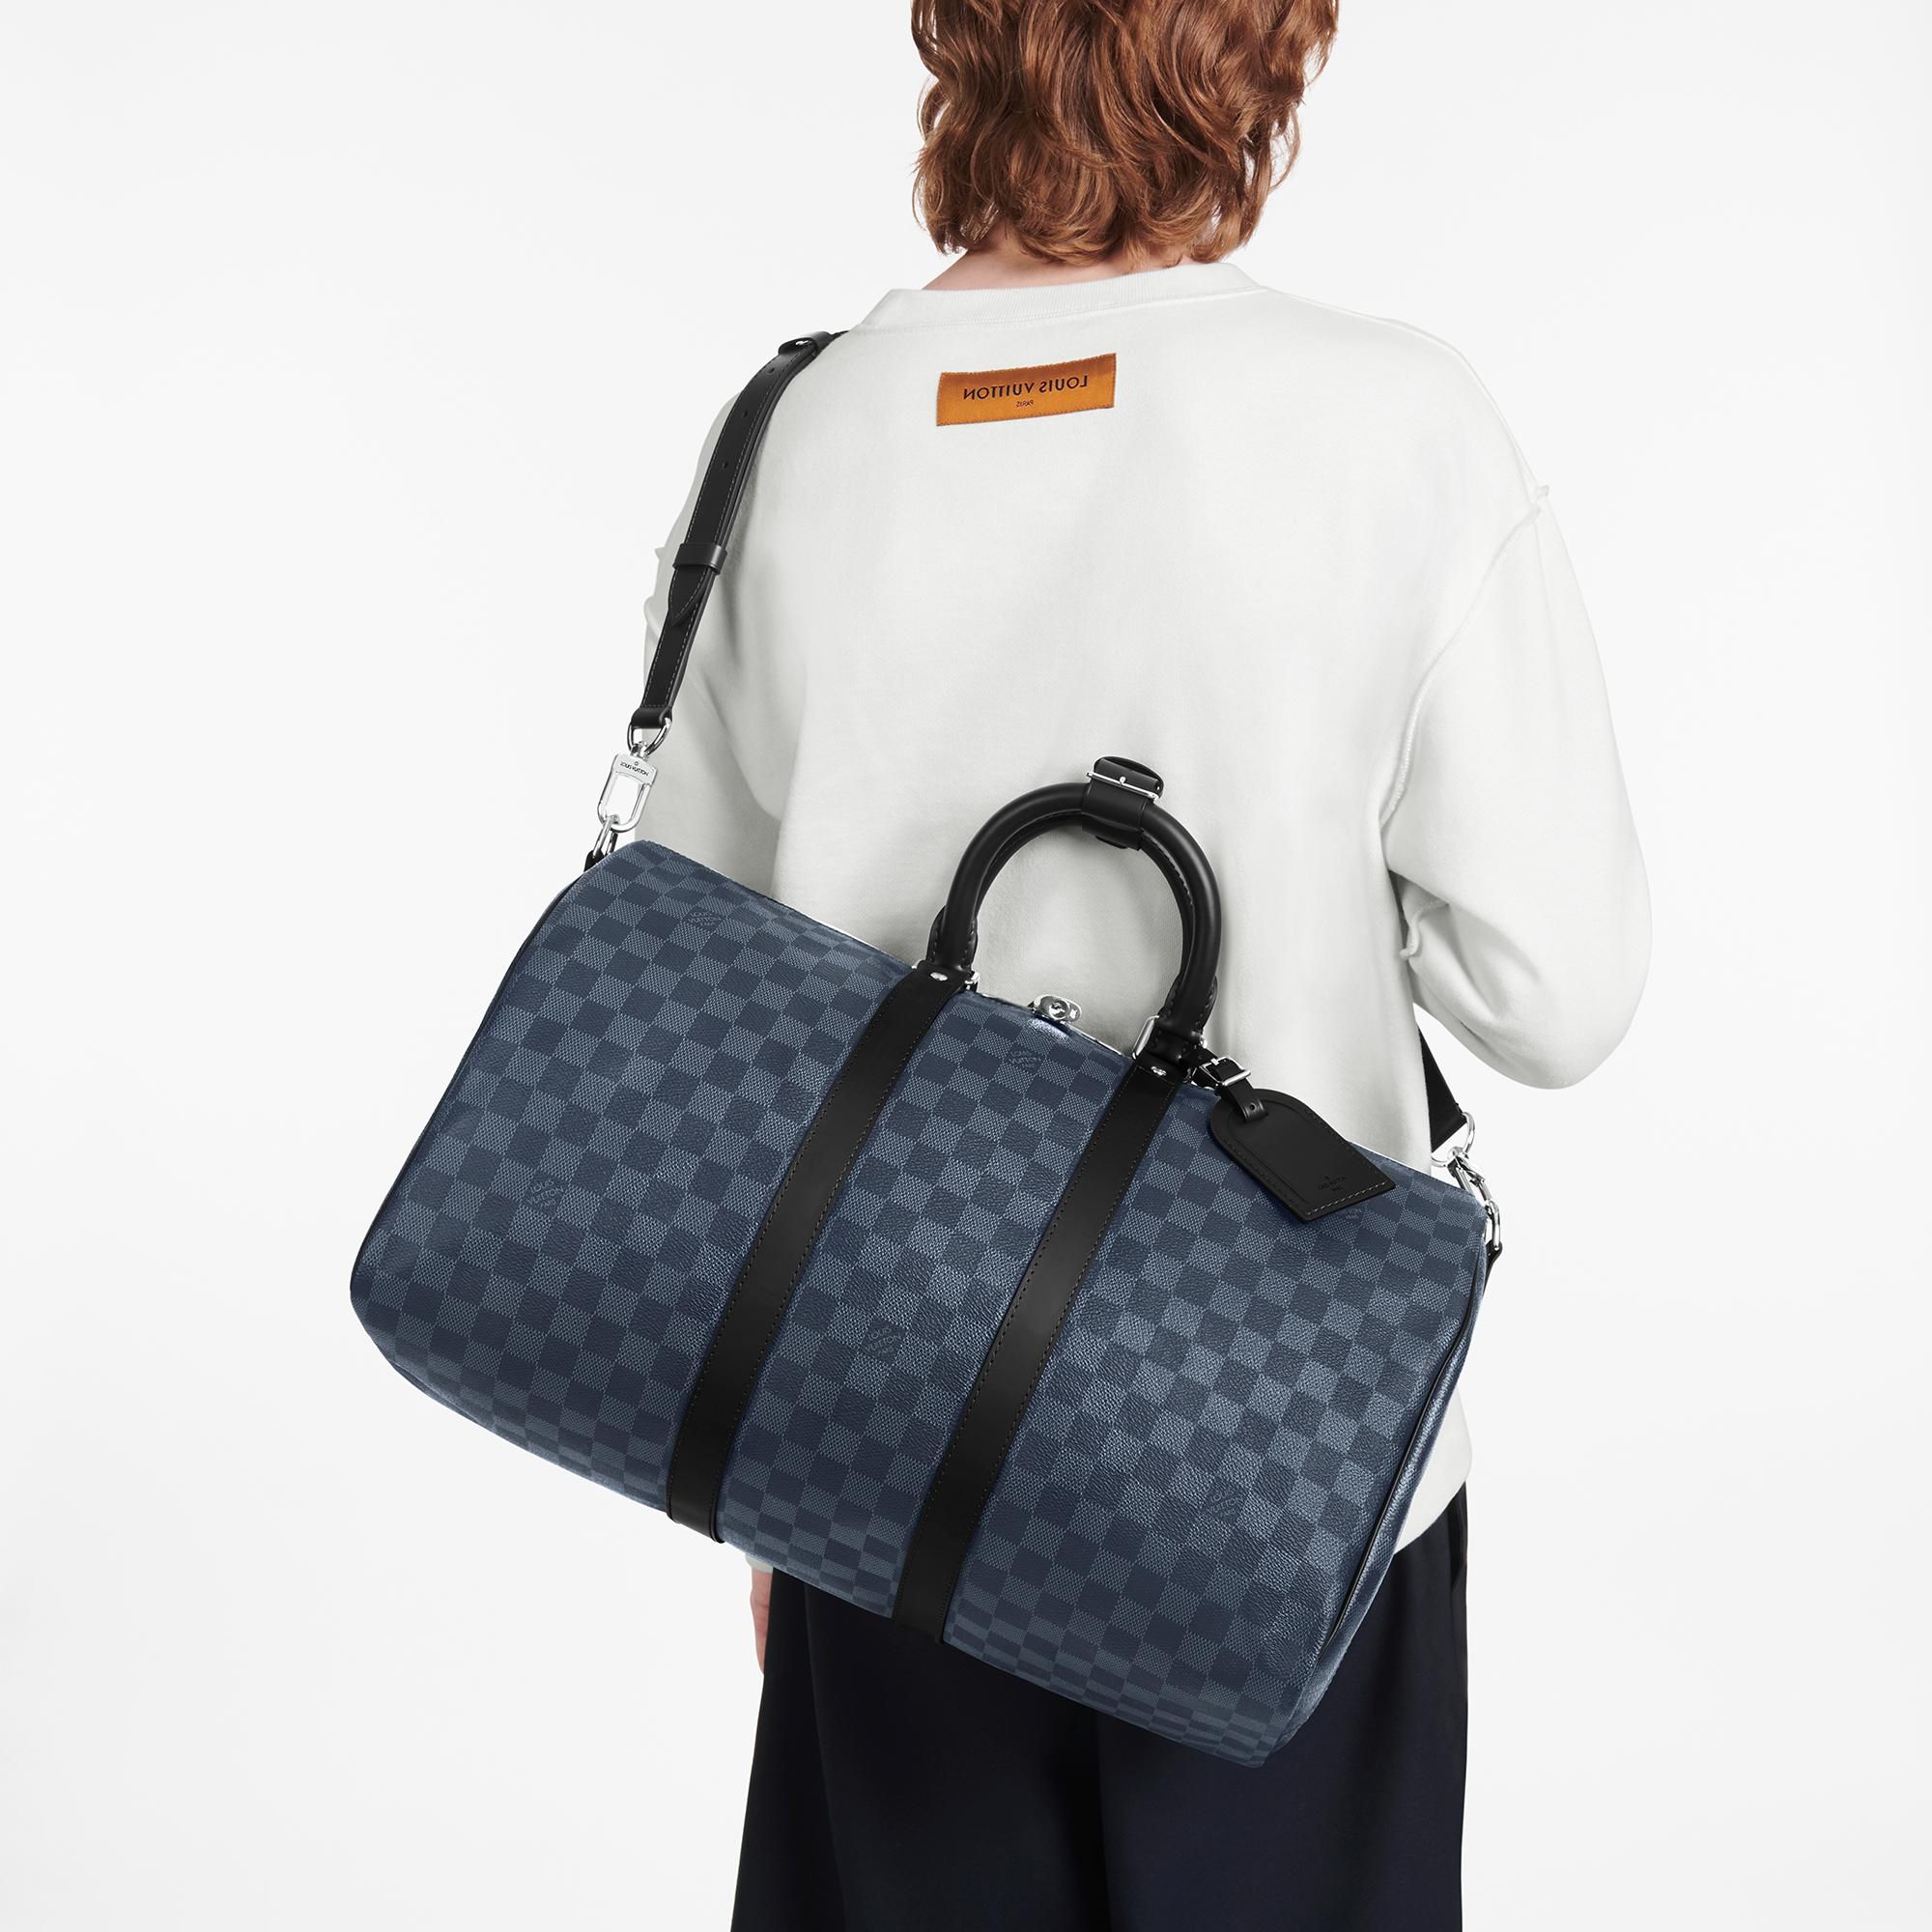 Top Four Favorites From The Louis Vuitton Men's Collection - Best Messenger  Bags, SLGs, Fragrance 